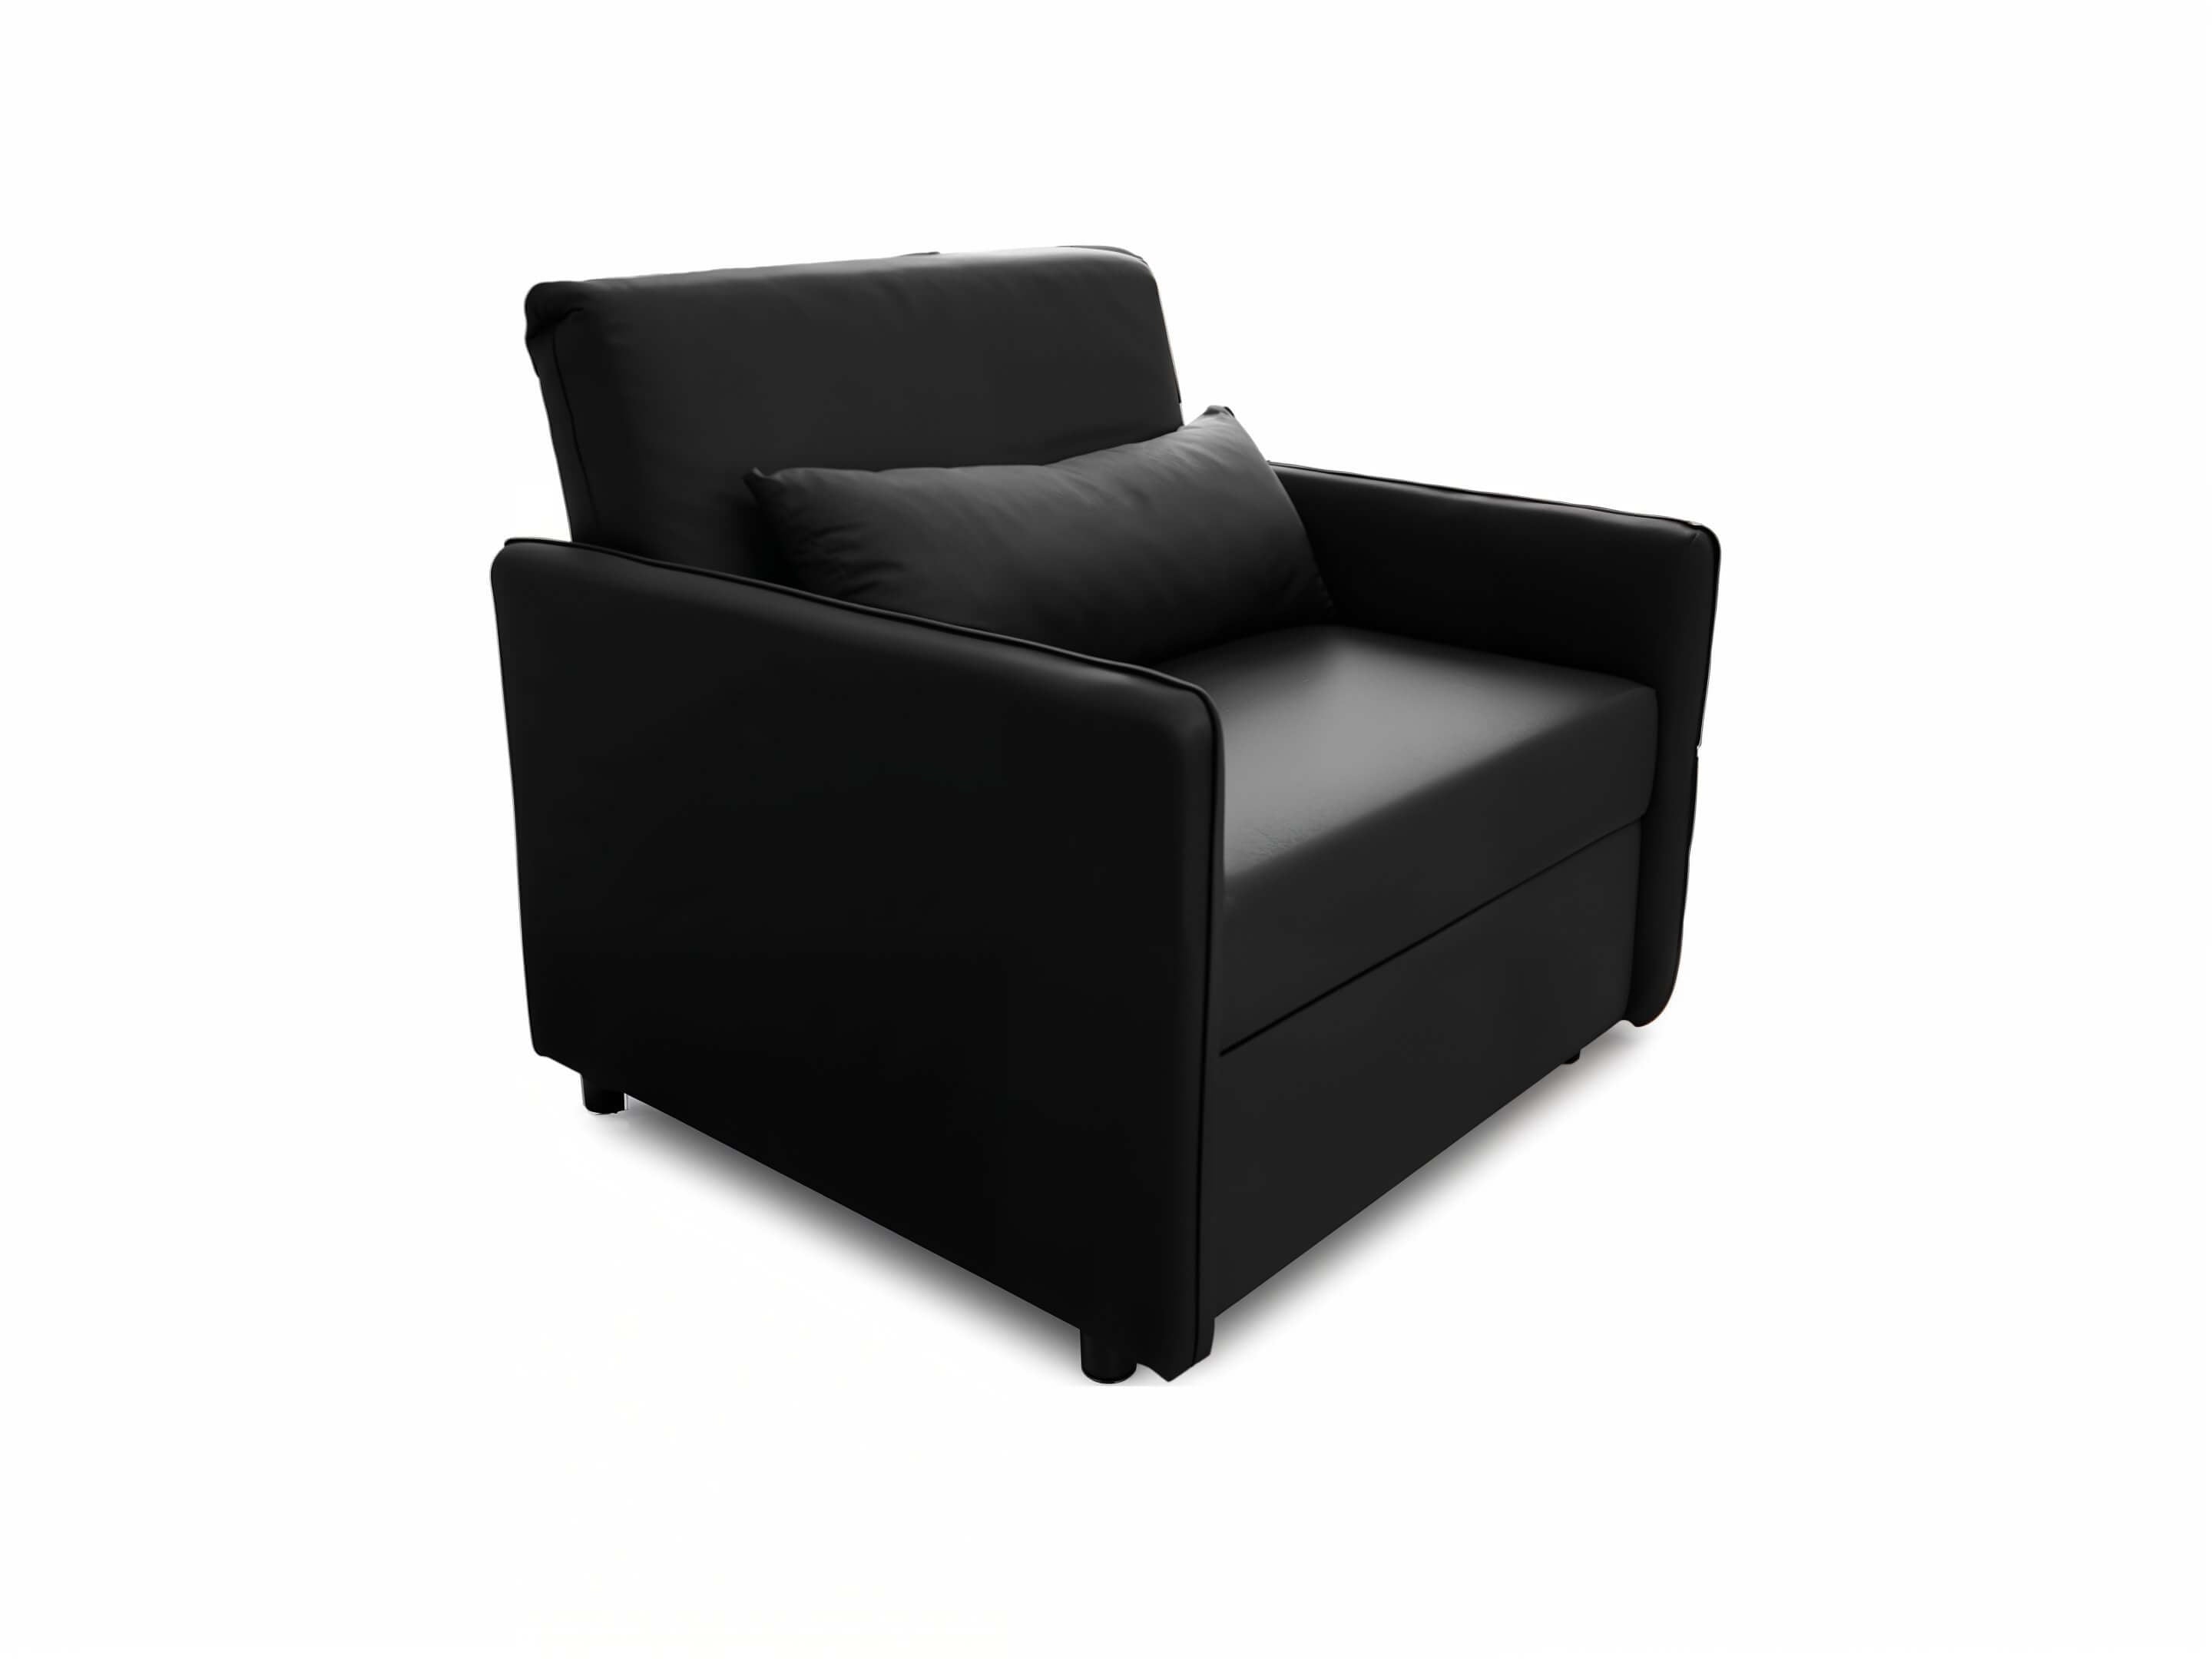 armchair single bed recliner sofa bed - Lux Furniture